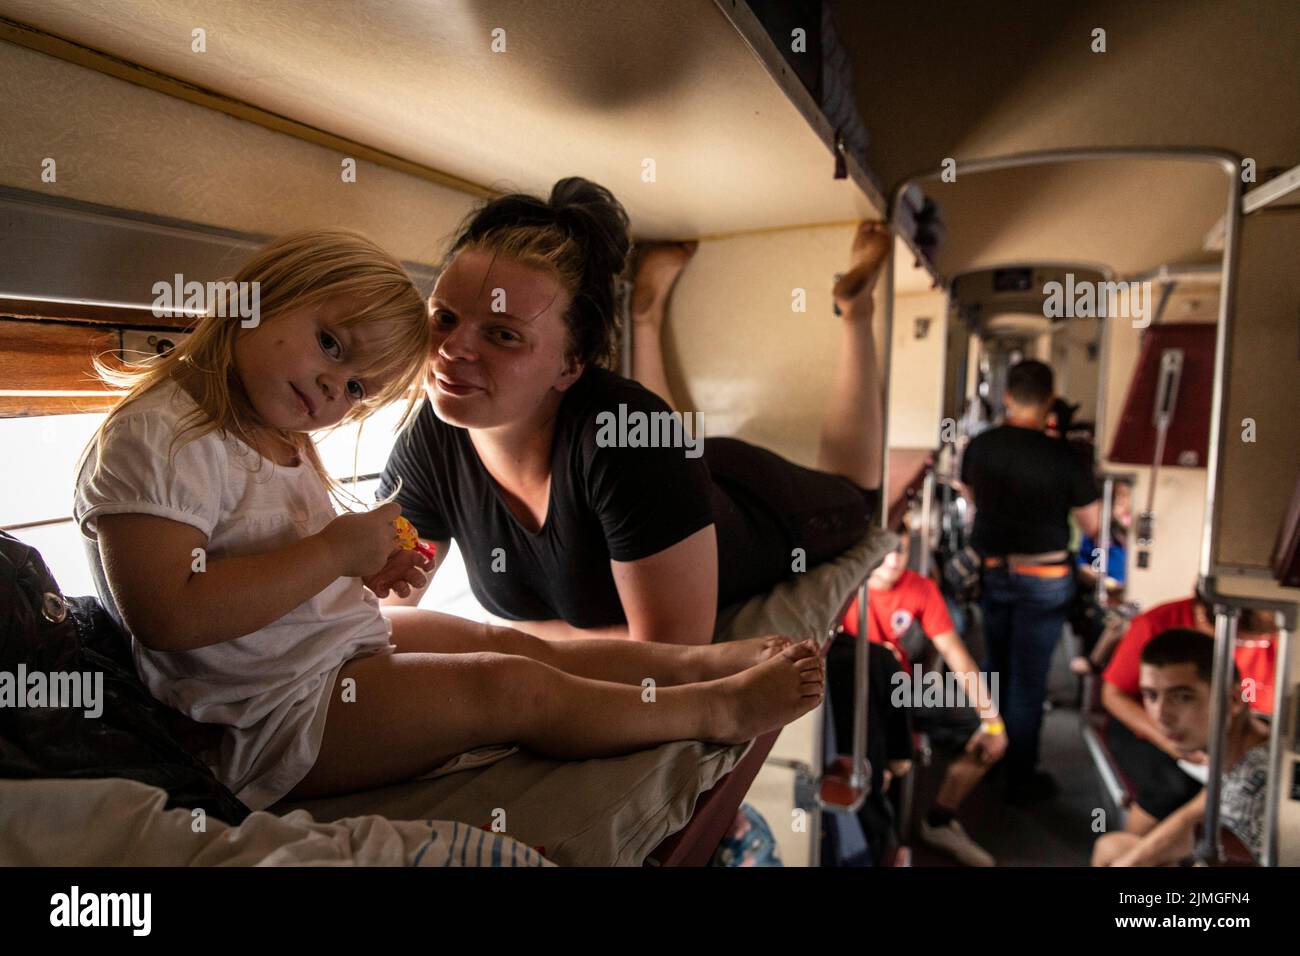 A mother and her daughter seen inside an evacuation train at Pokorvsk Train Station, Donetsk. Amid the intensified fighting in the Eastern part of Ukraine, east Ukraine is now intensifying its civilian evacuation, as millions of Ukrainian families have been evacuating from the closer and closer war, as many of them will be relocated to the western part of the country. According to the United Nations, at least 12 million people have fled their homes since Russia's invasion of Ukraine, while seven million people are displaced inside the country. Stock Photo